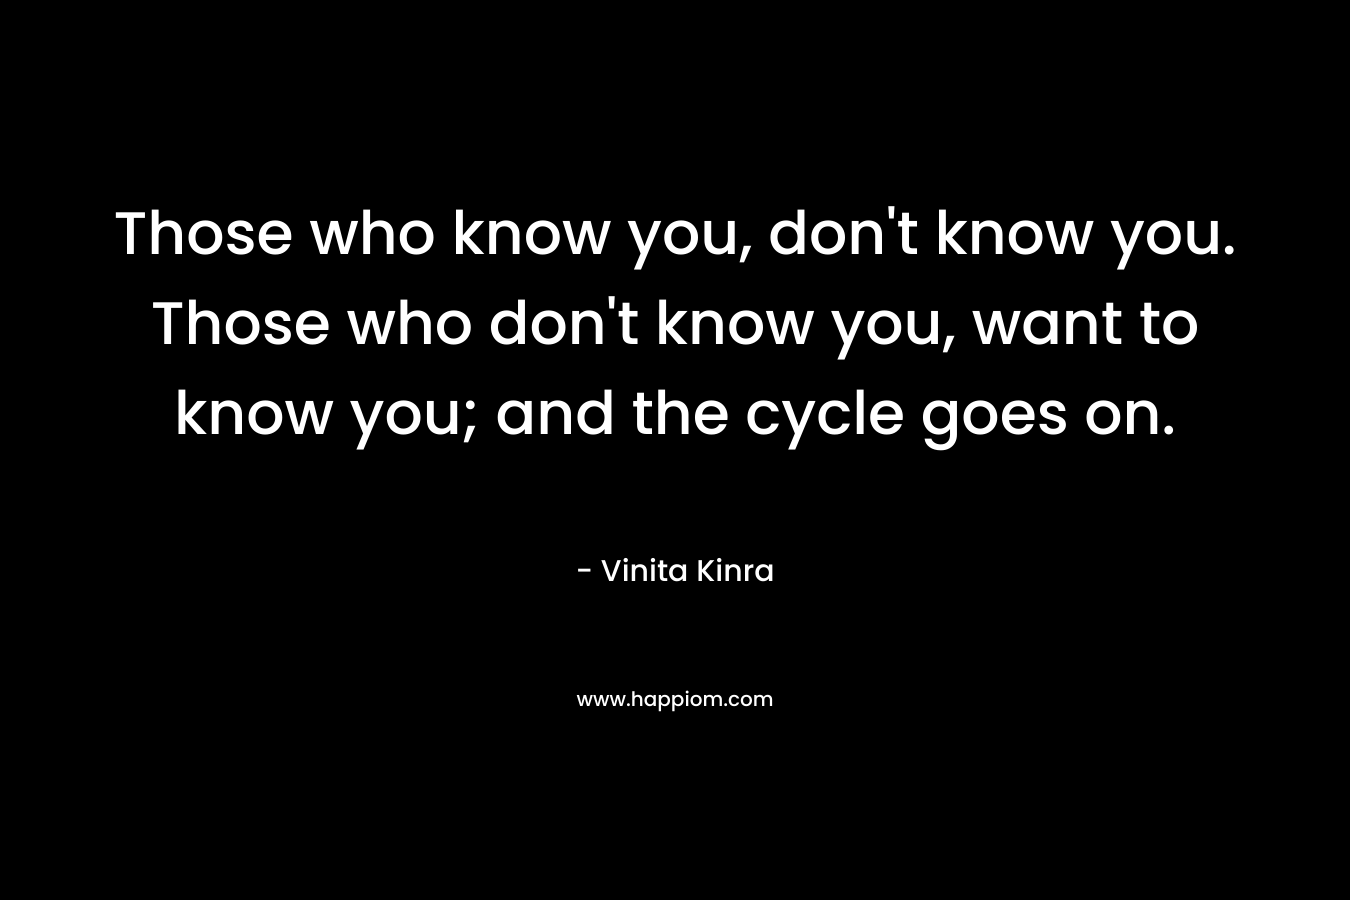 Those who know you, don't know you. Those who don't know you, want to know you; and the cycle goes on.